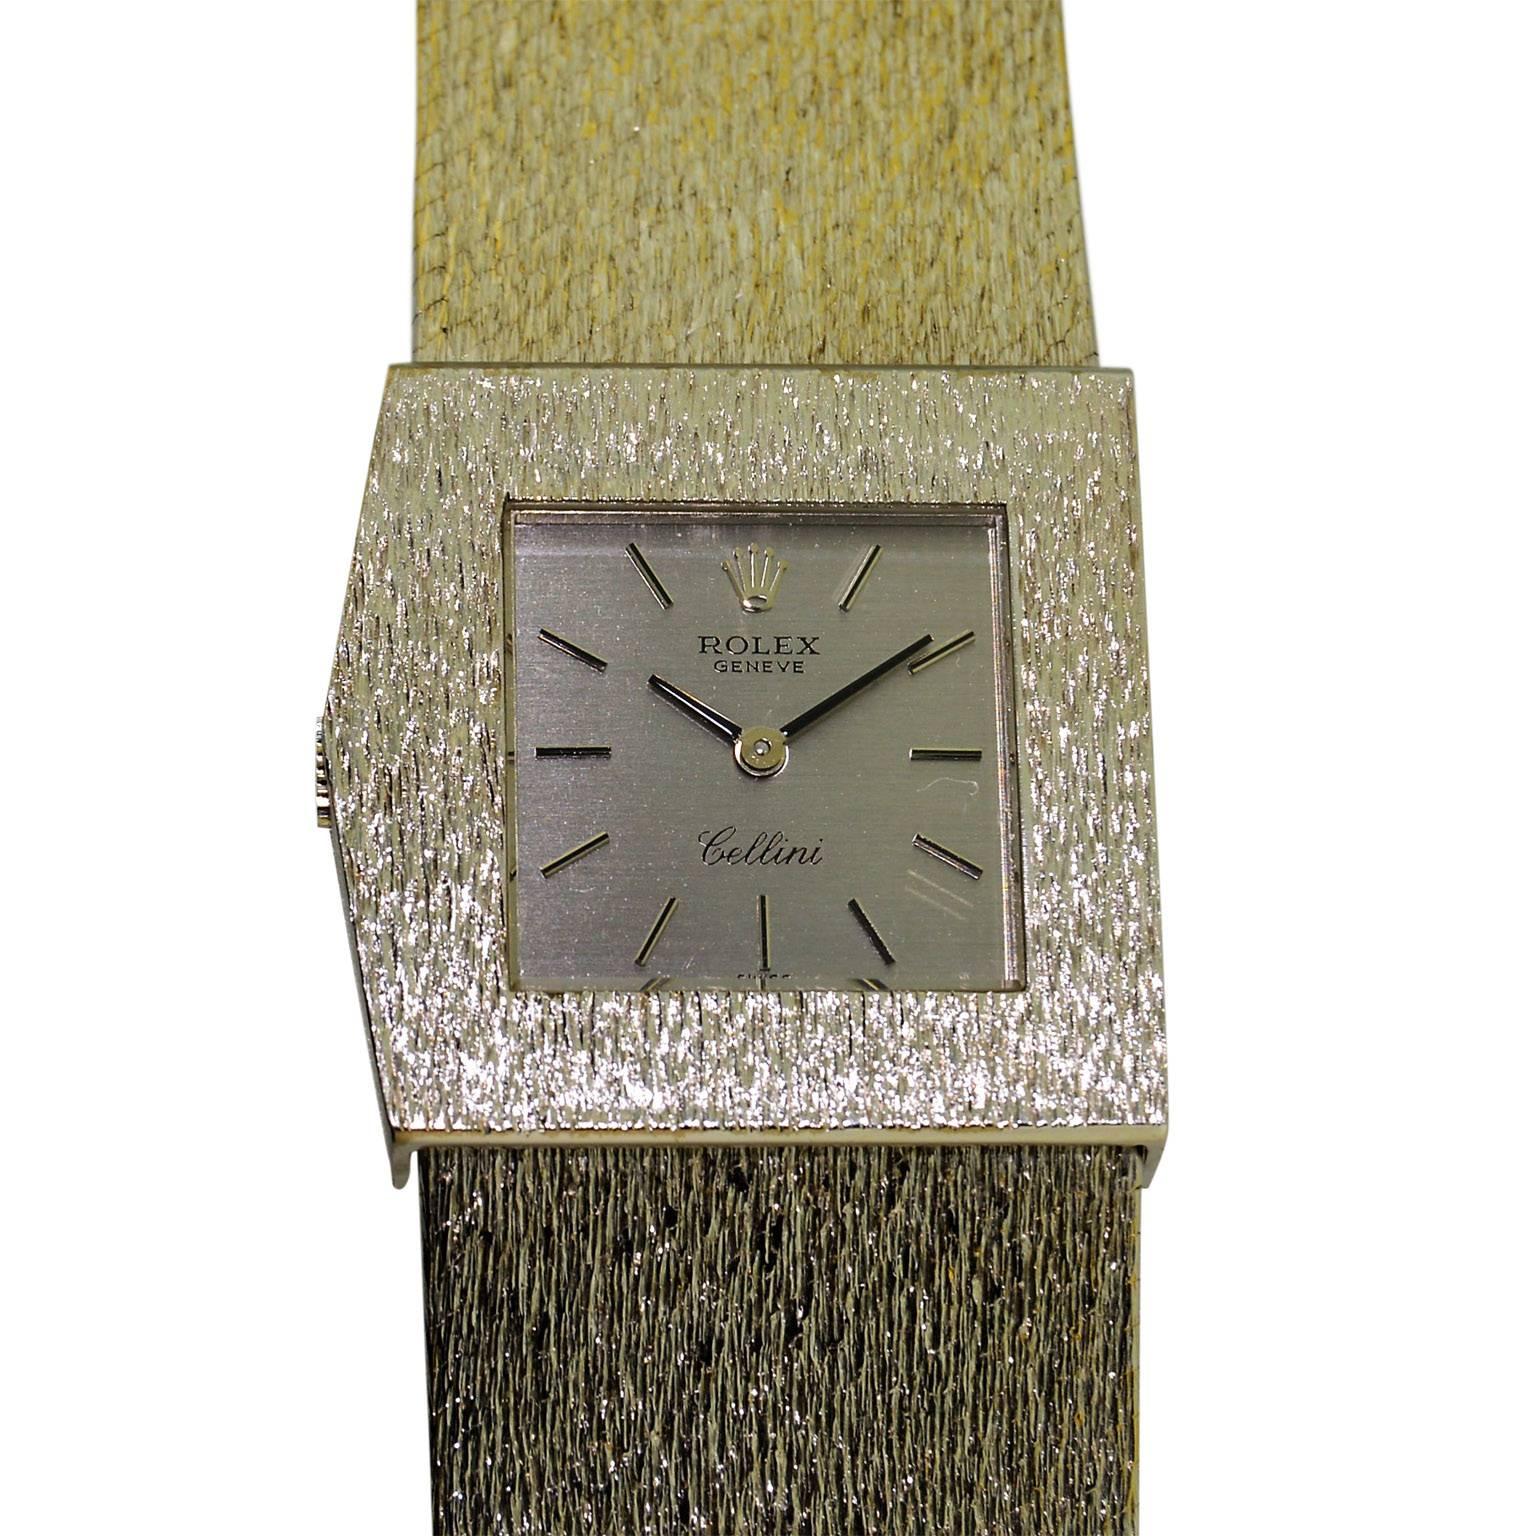 Rolex White Gold Cellini Right Handed Manual Watch, circa 1970s 1